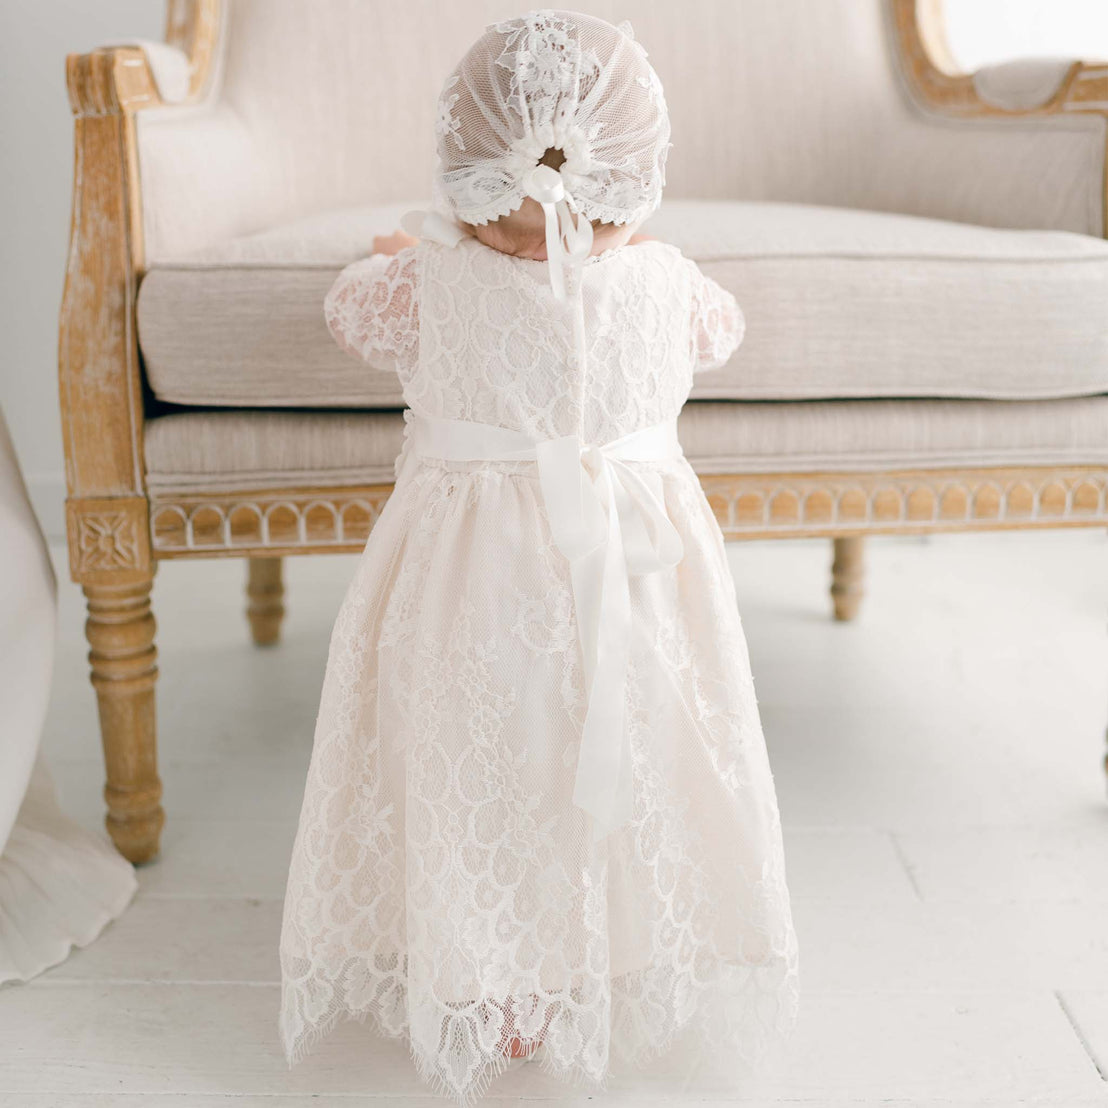 A toddler in a delicate white lace Juliette Romper Dress and a matching headband stands with her back to the camera in front of an elegant sofa in a softly lit, upscale room.